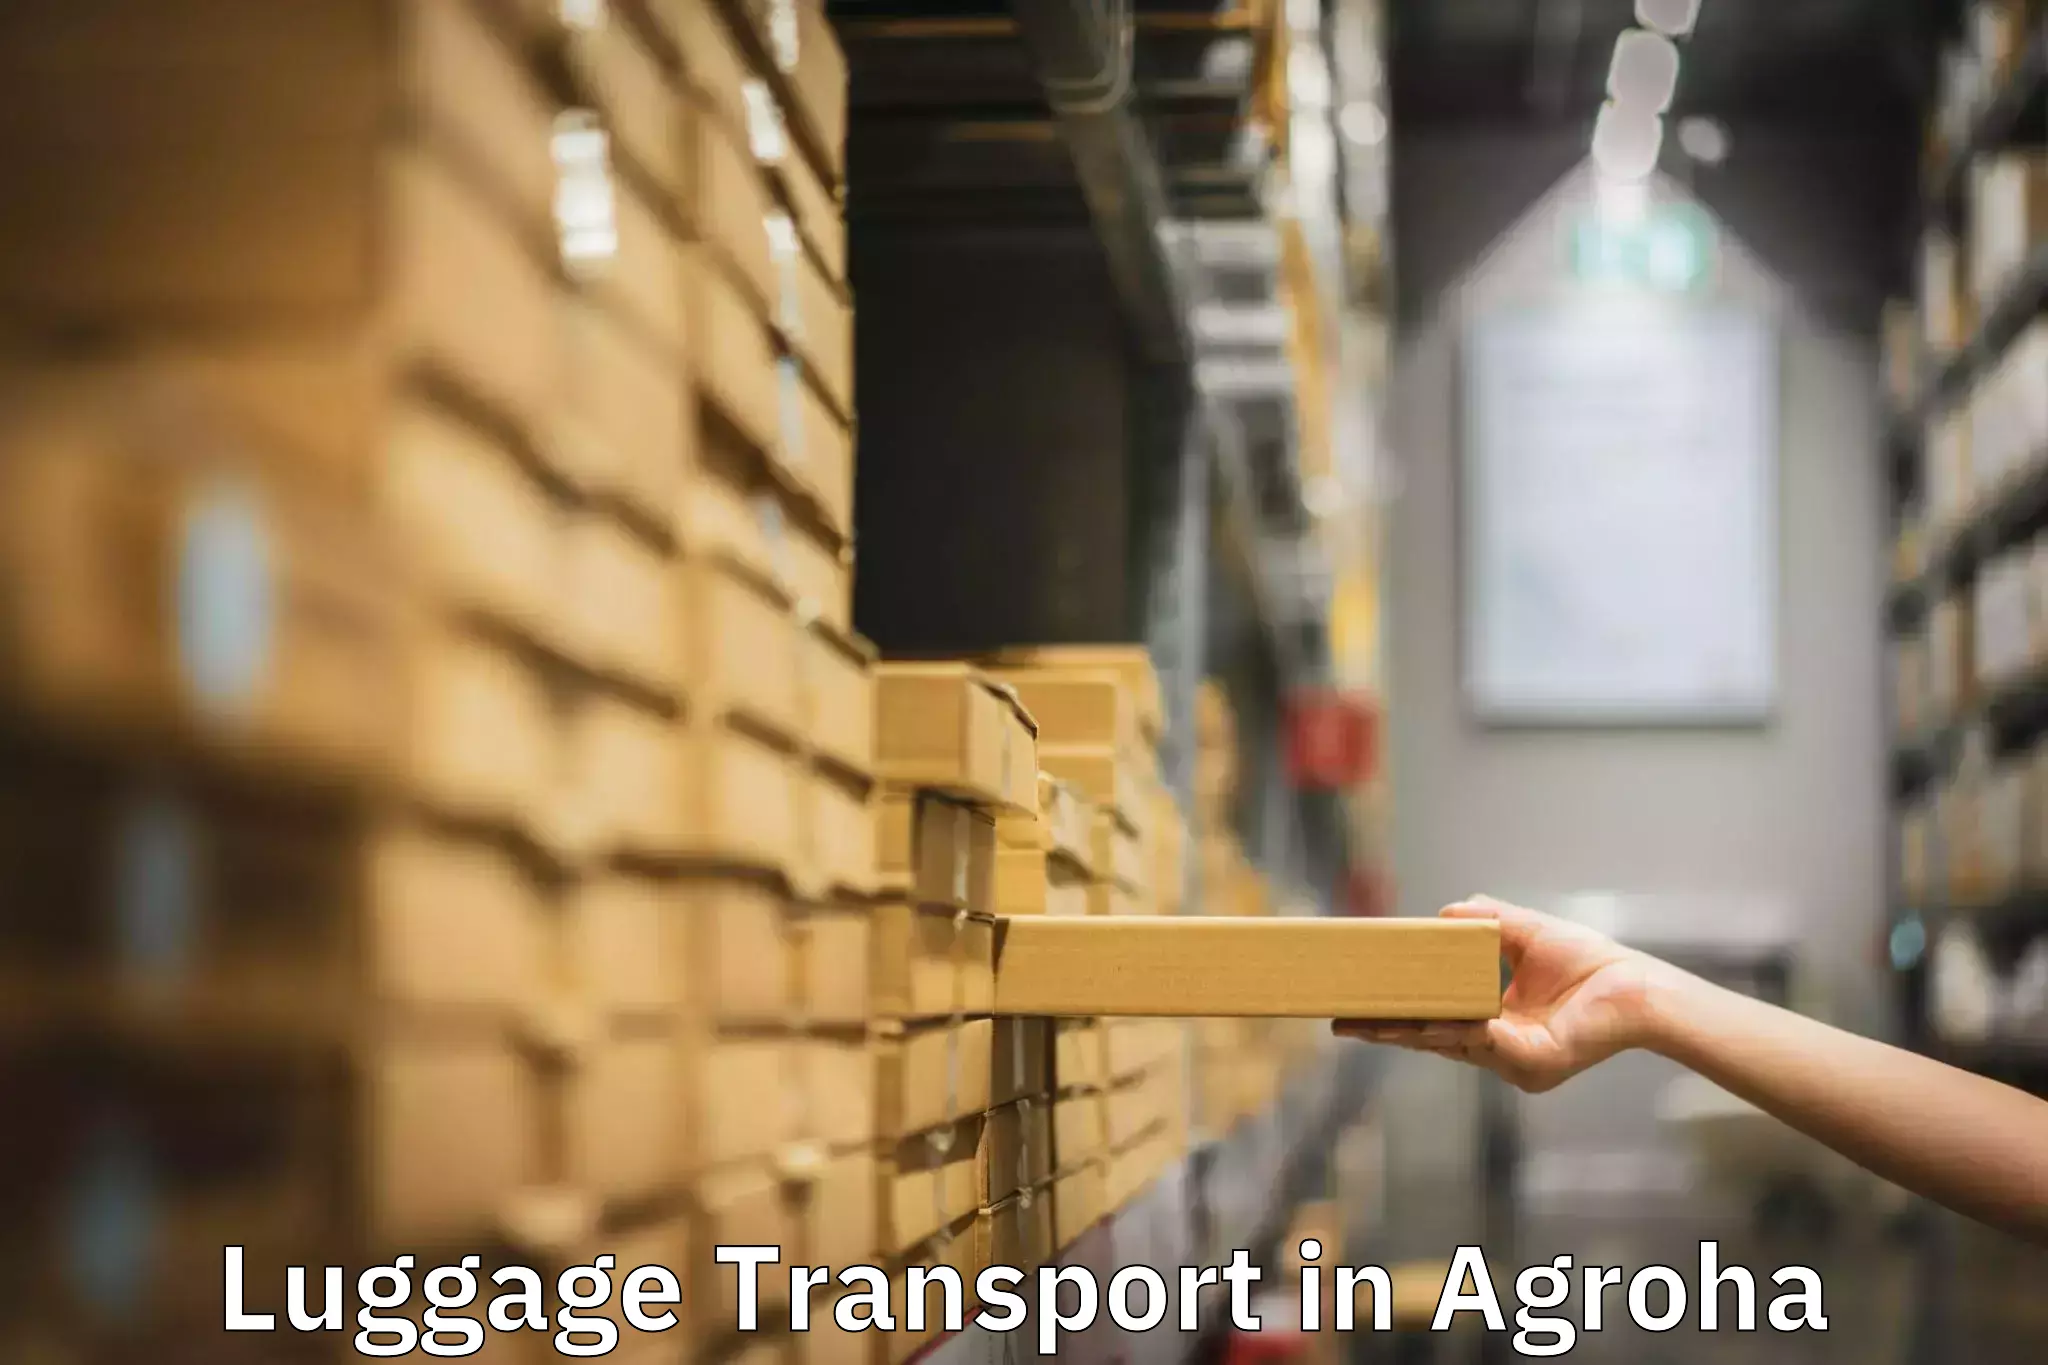 Luggage transport logistics in Agroha